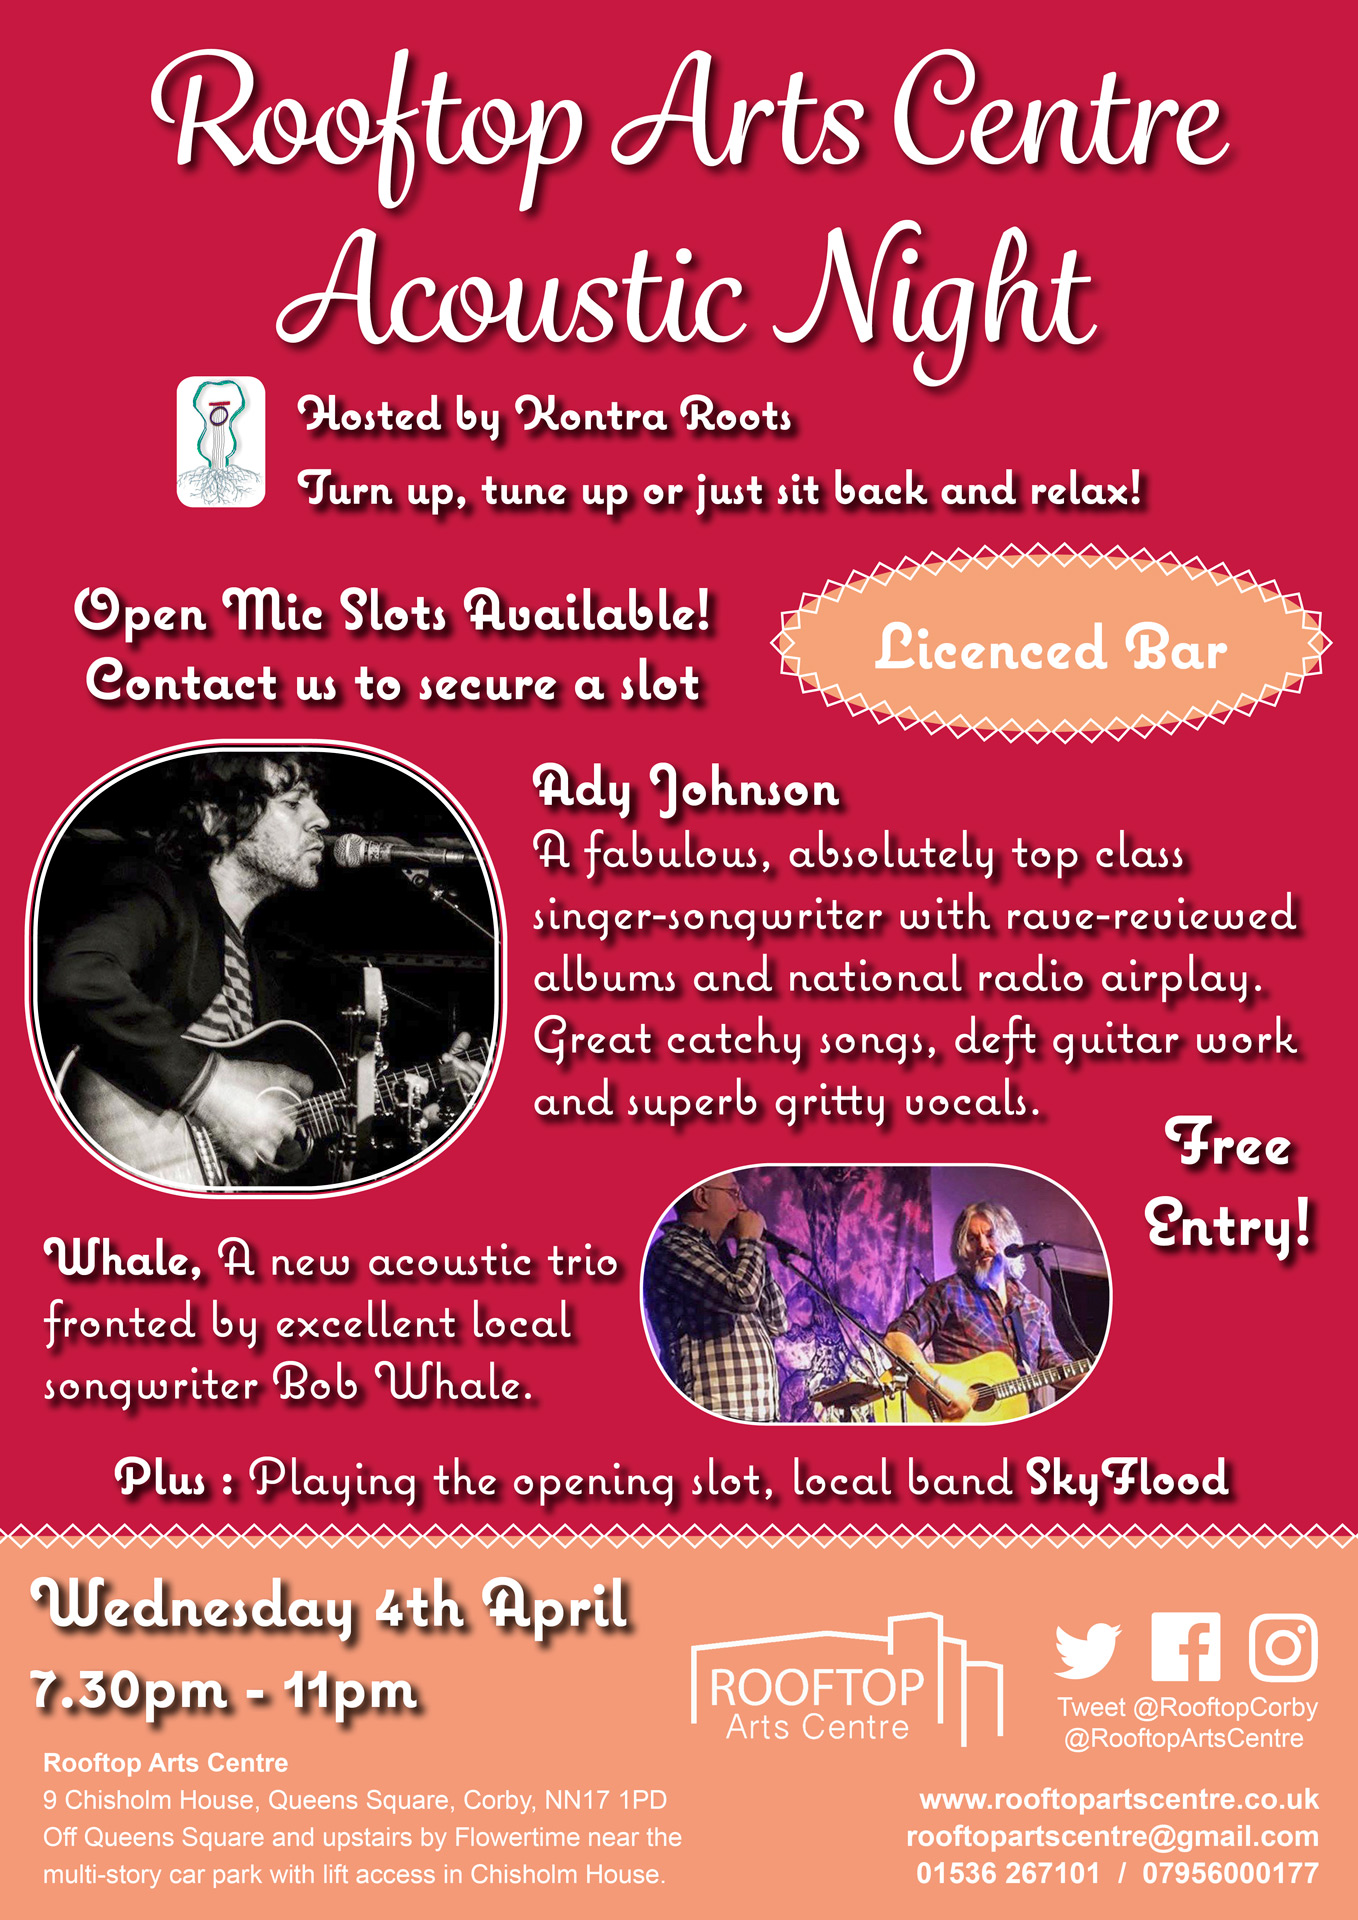 Poster advertising the monthly acoustic night at the Rooftop Arts Centre